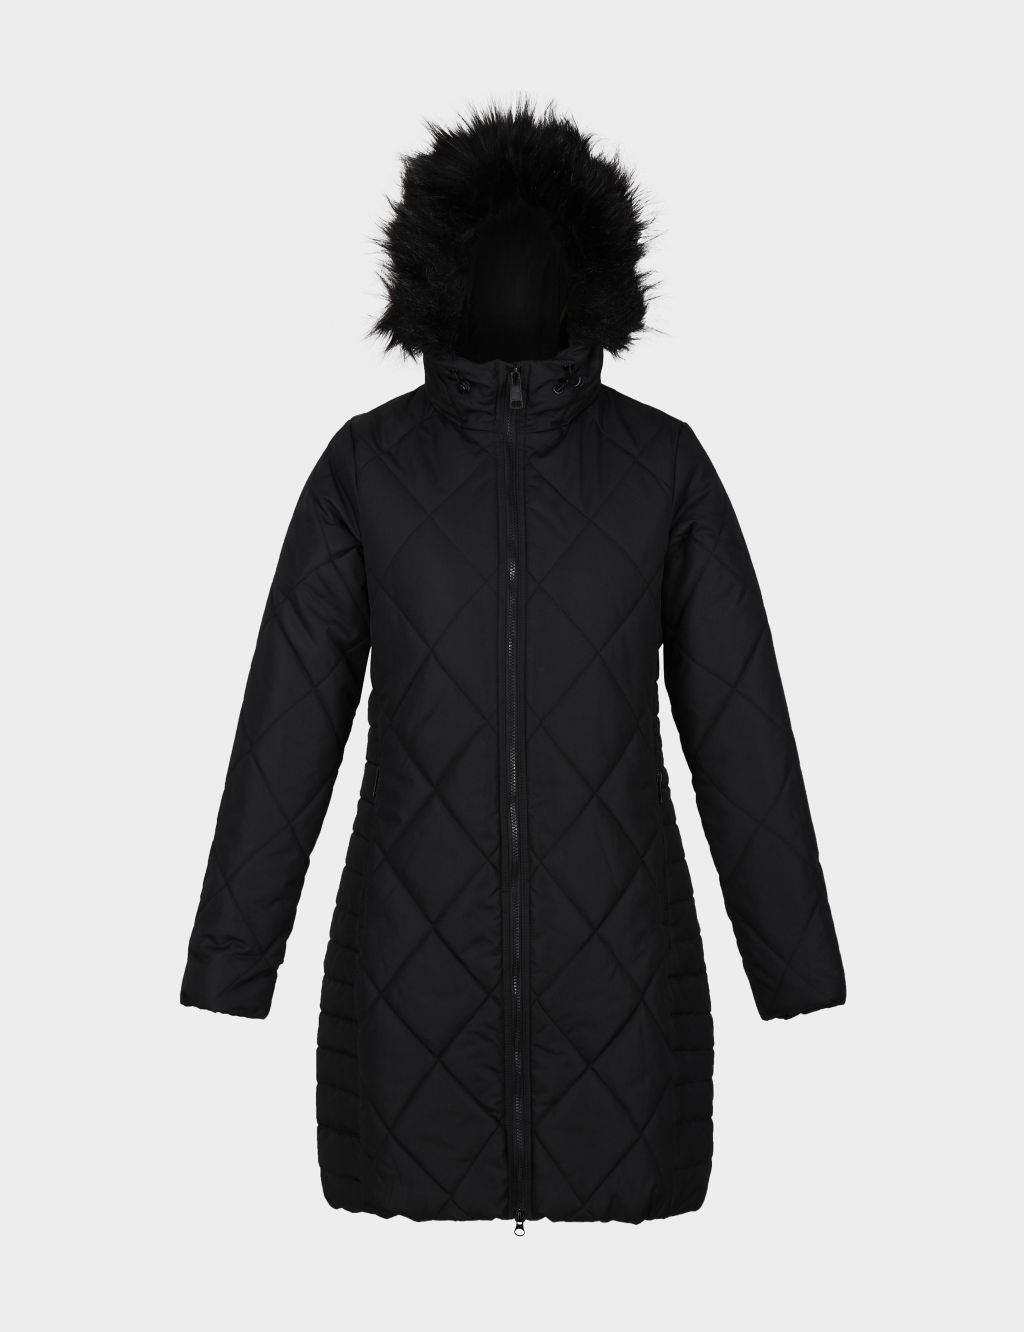 Fritha II Quilted Hooded Jacket image 2